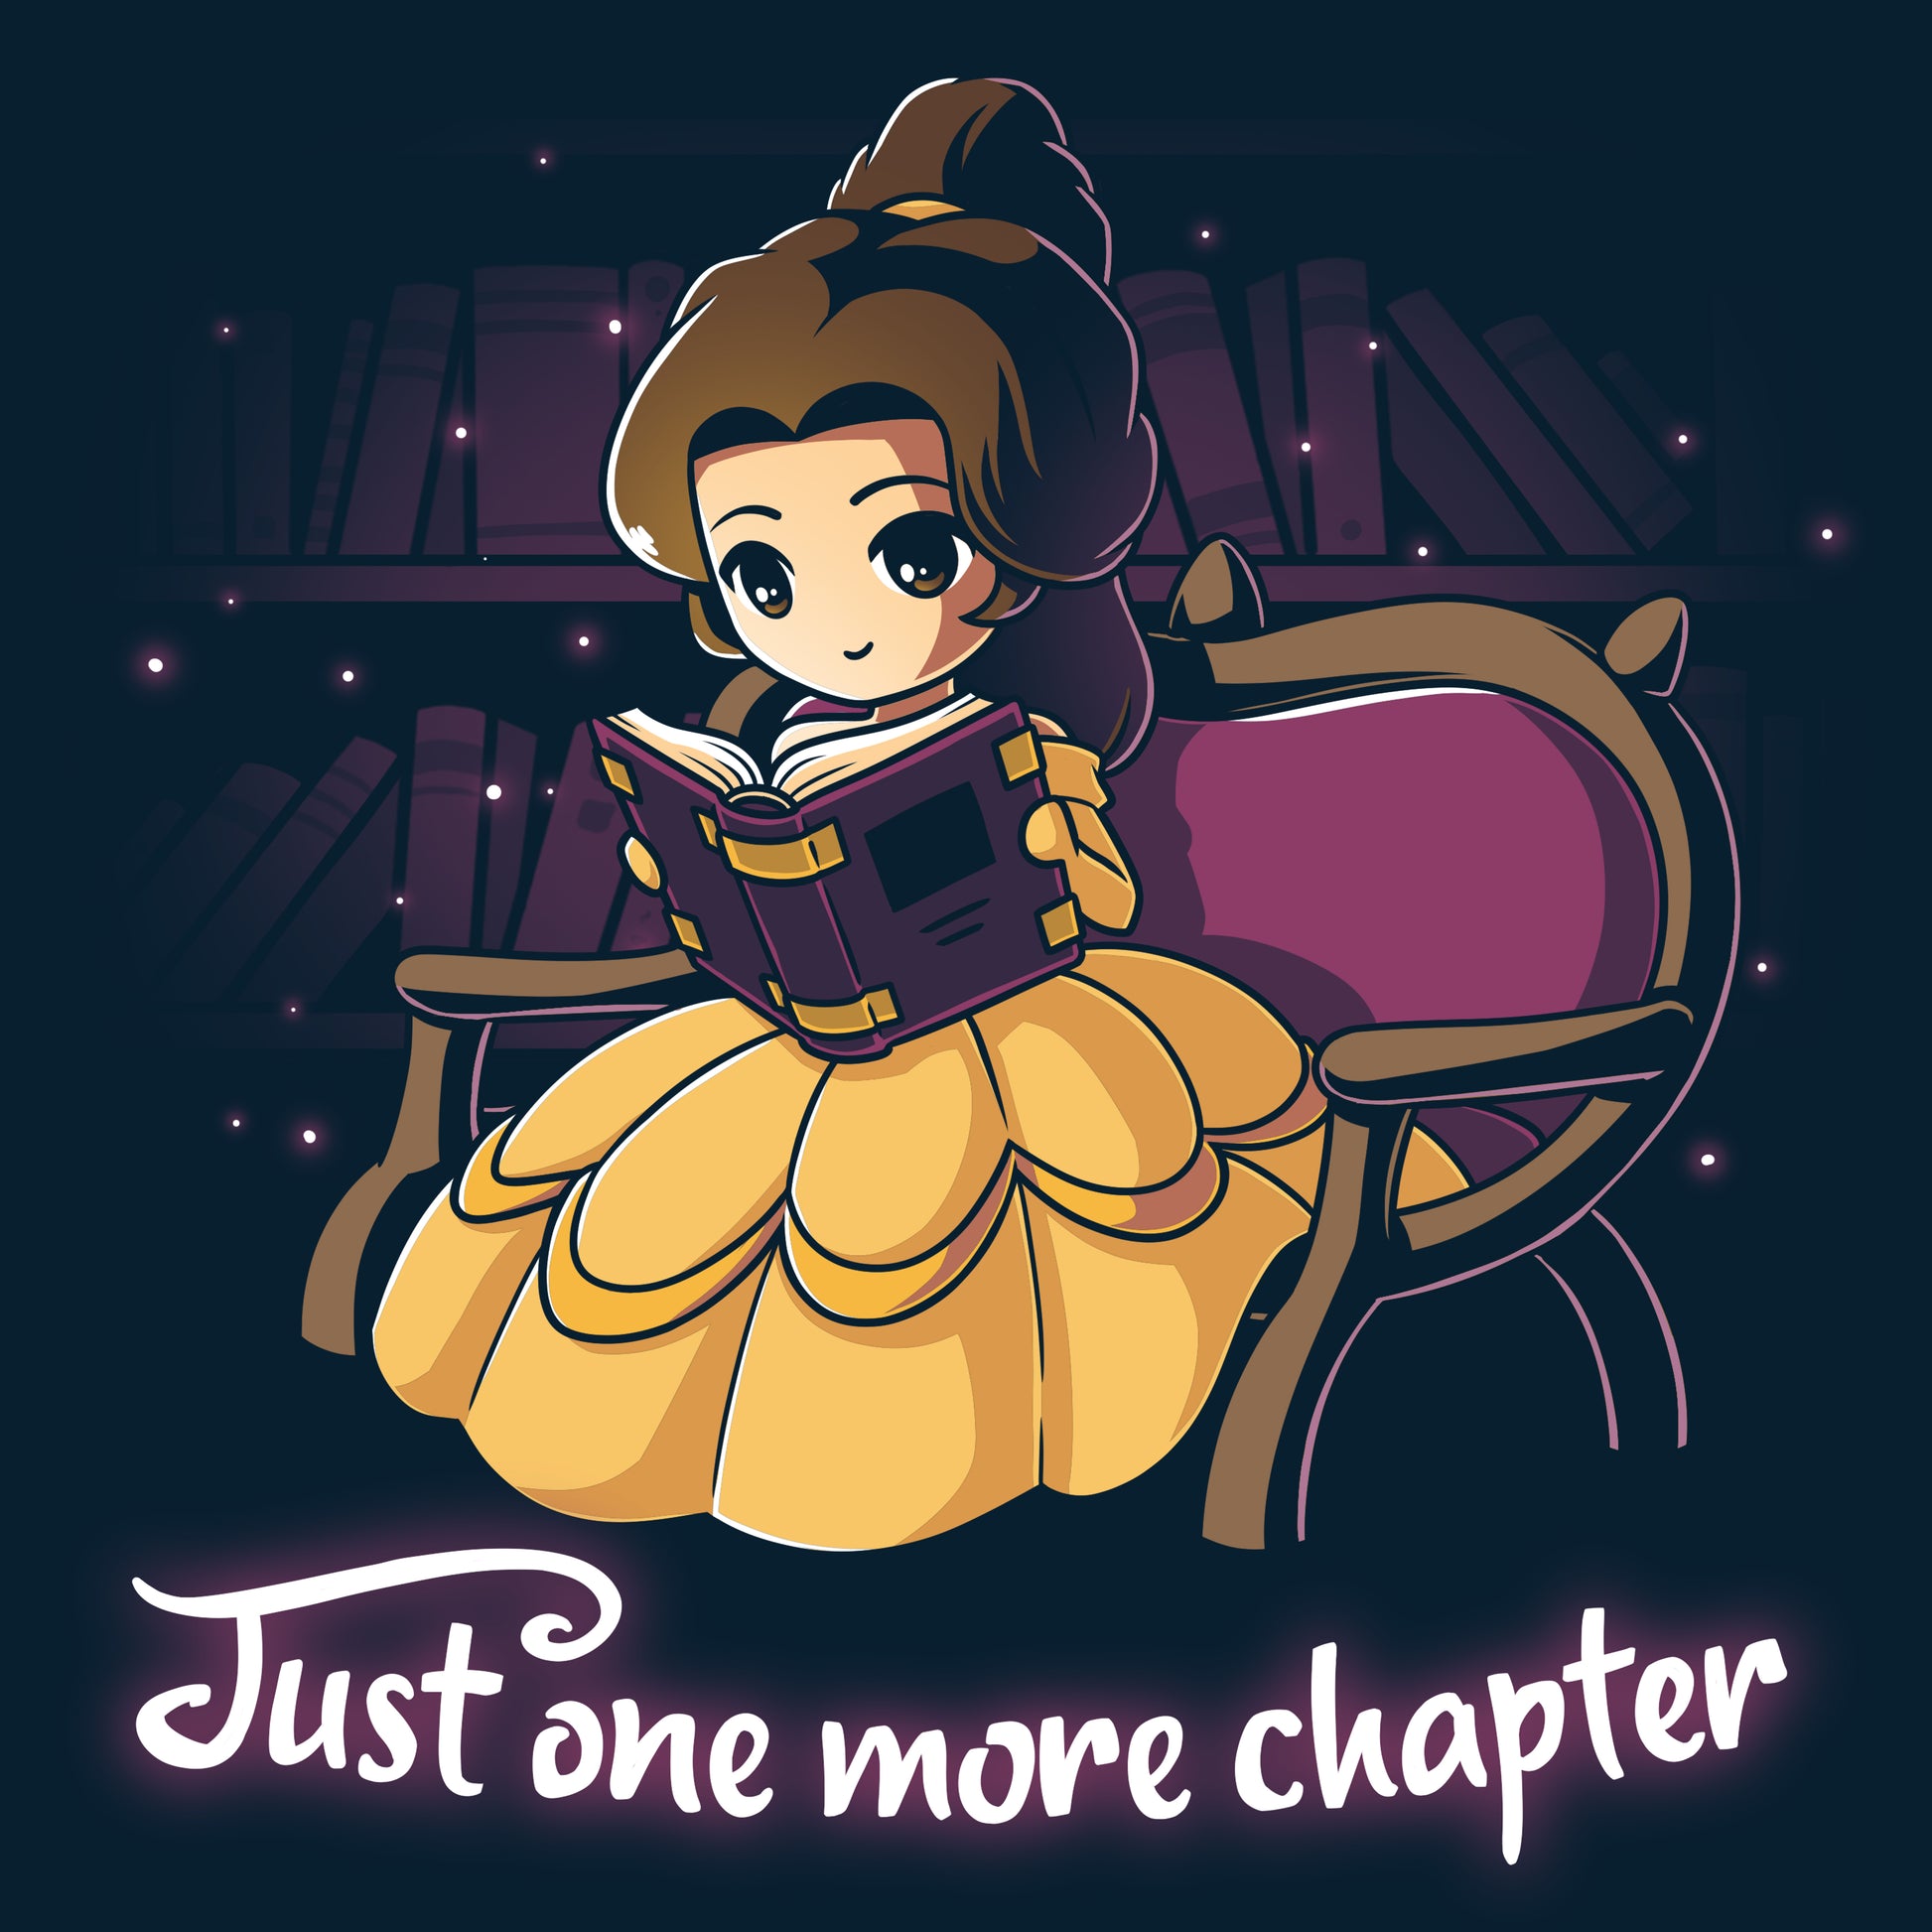 Get your hands on officially licensed Disney products that capture the enchantment of Belle and the Beast's timeless story. Don't miss out on Just One More Chapter (Belle) by Disney!